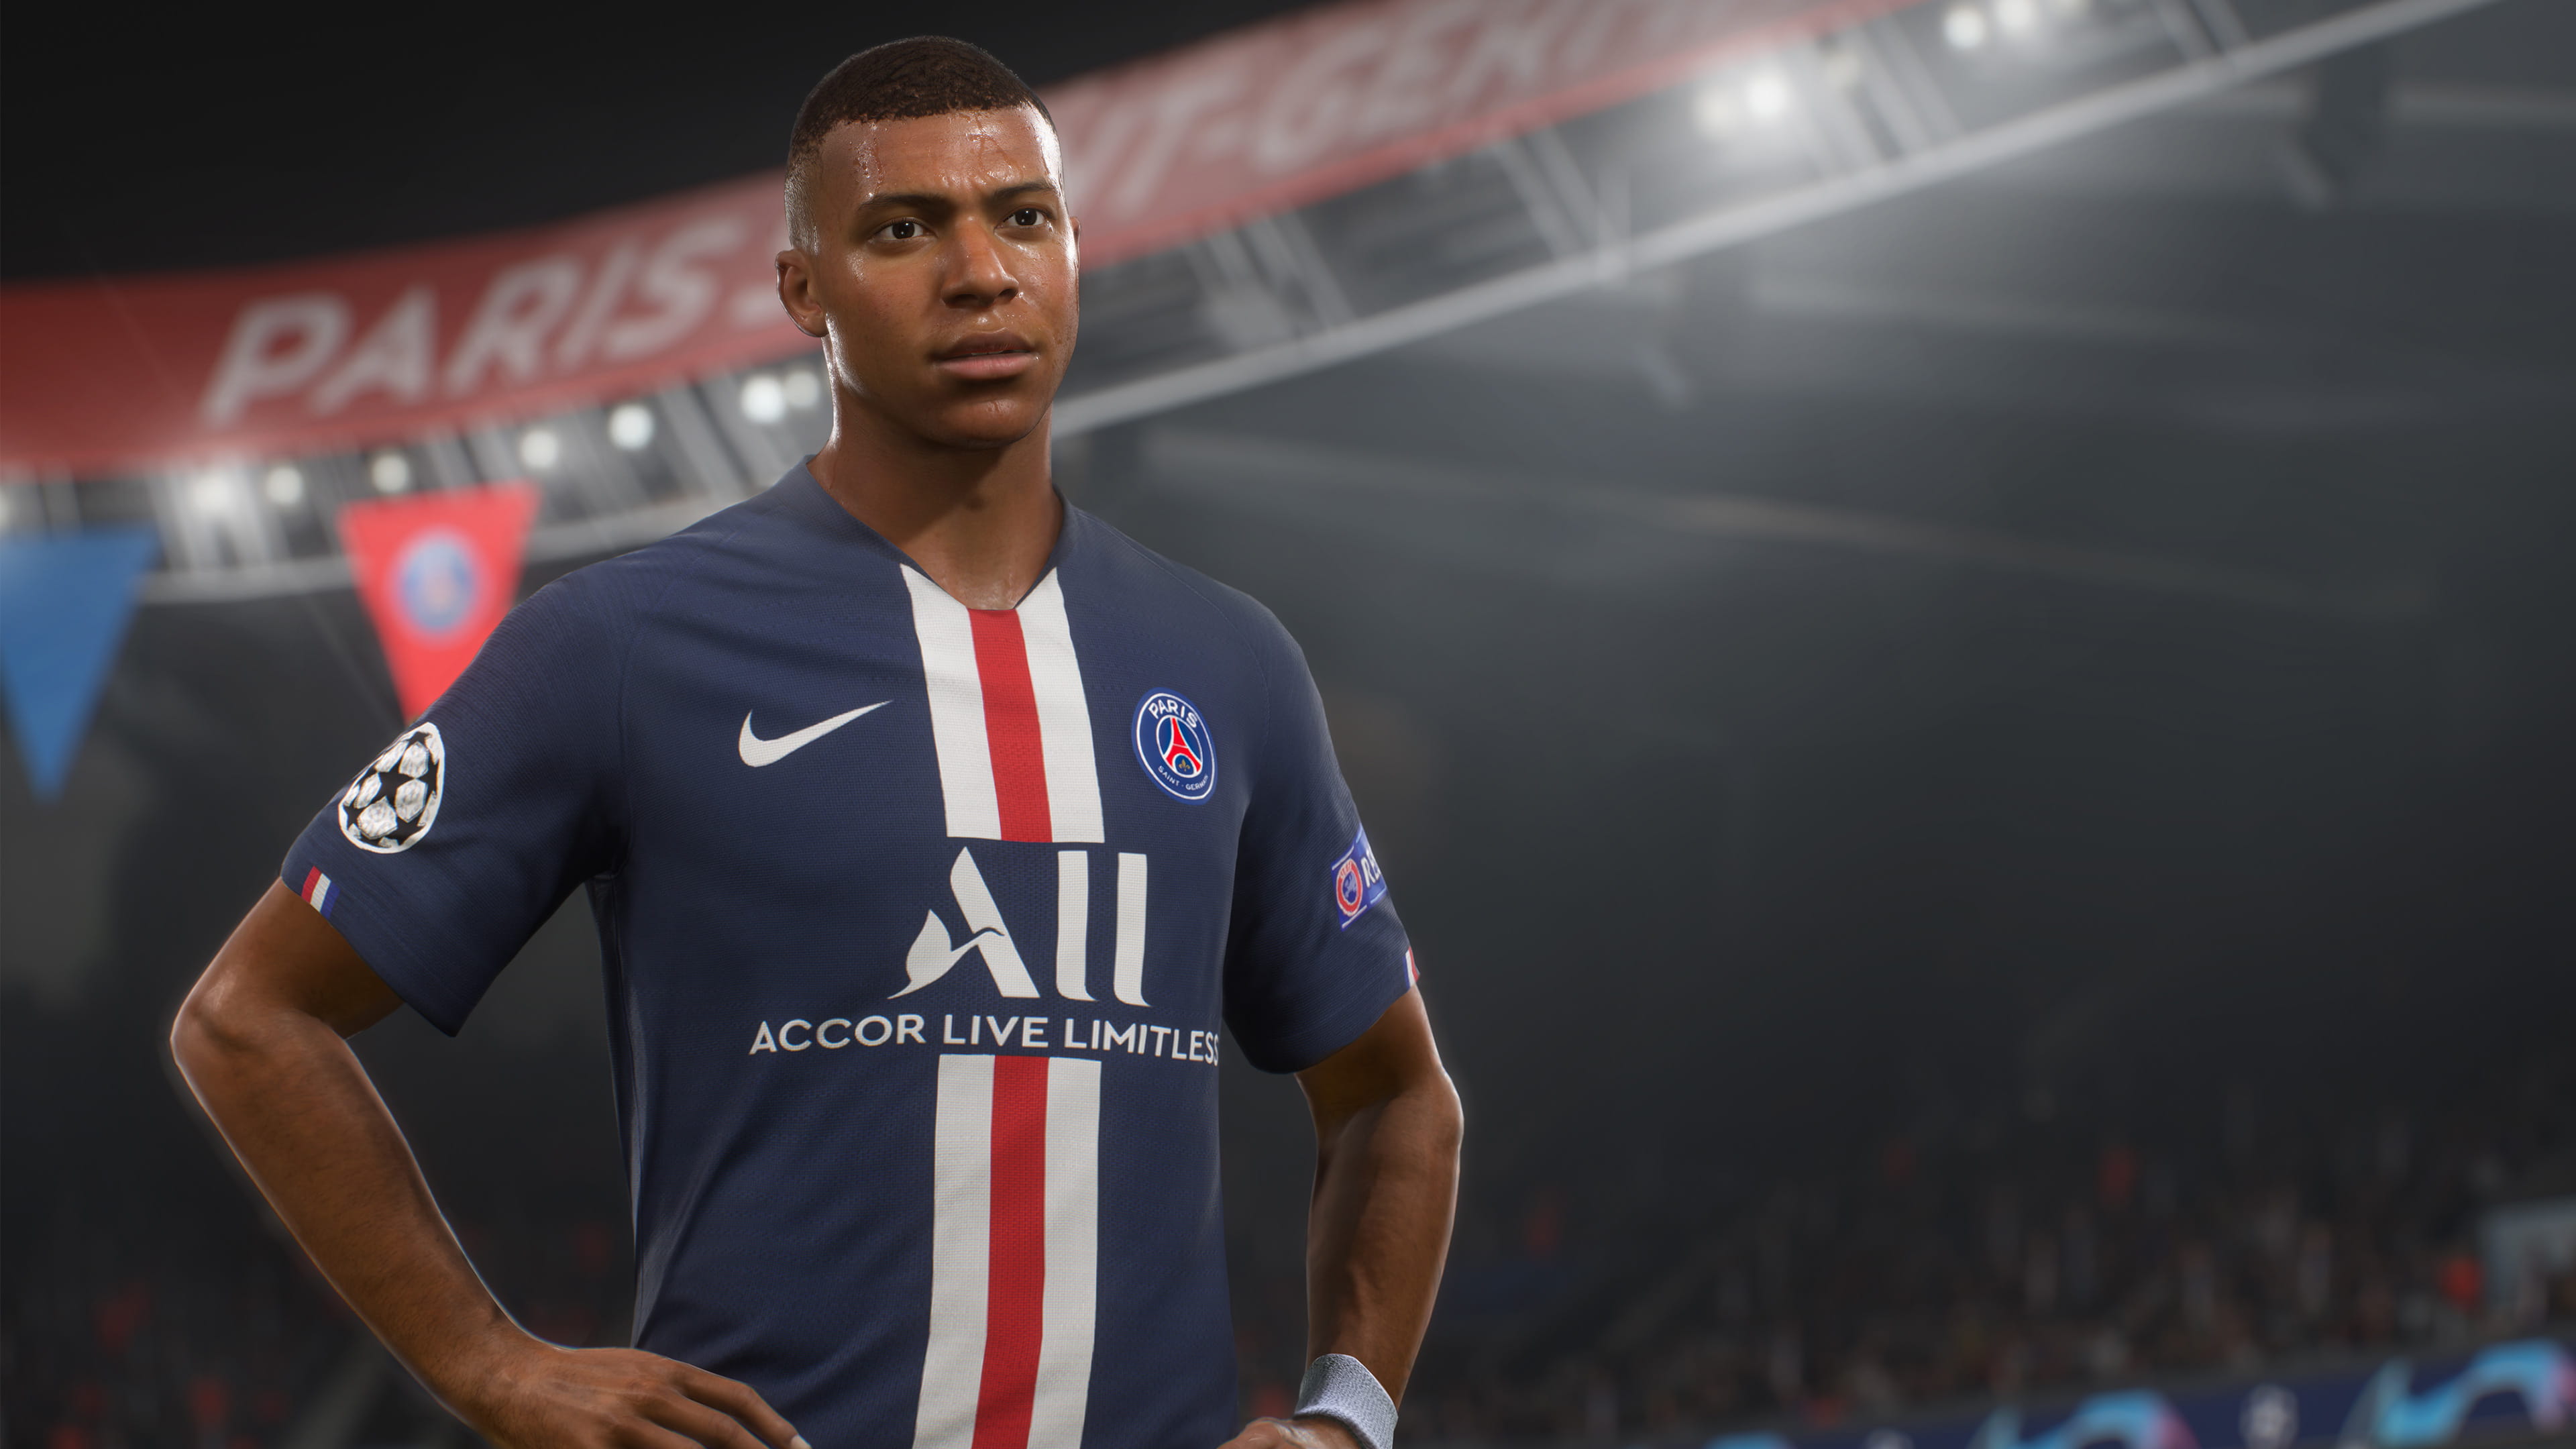 Fifa 21 S Edgy New Covers Will All Feature Kylian Mbappe The Loadout